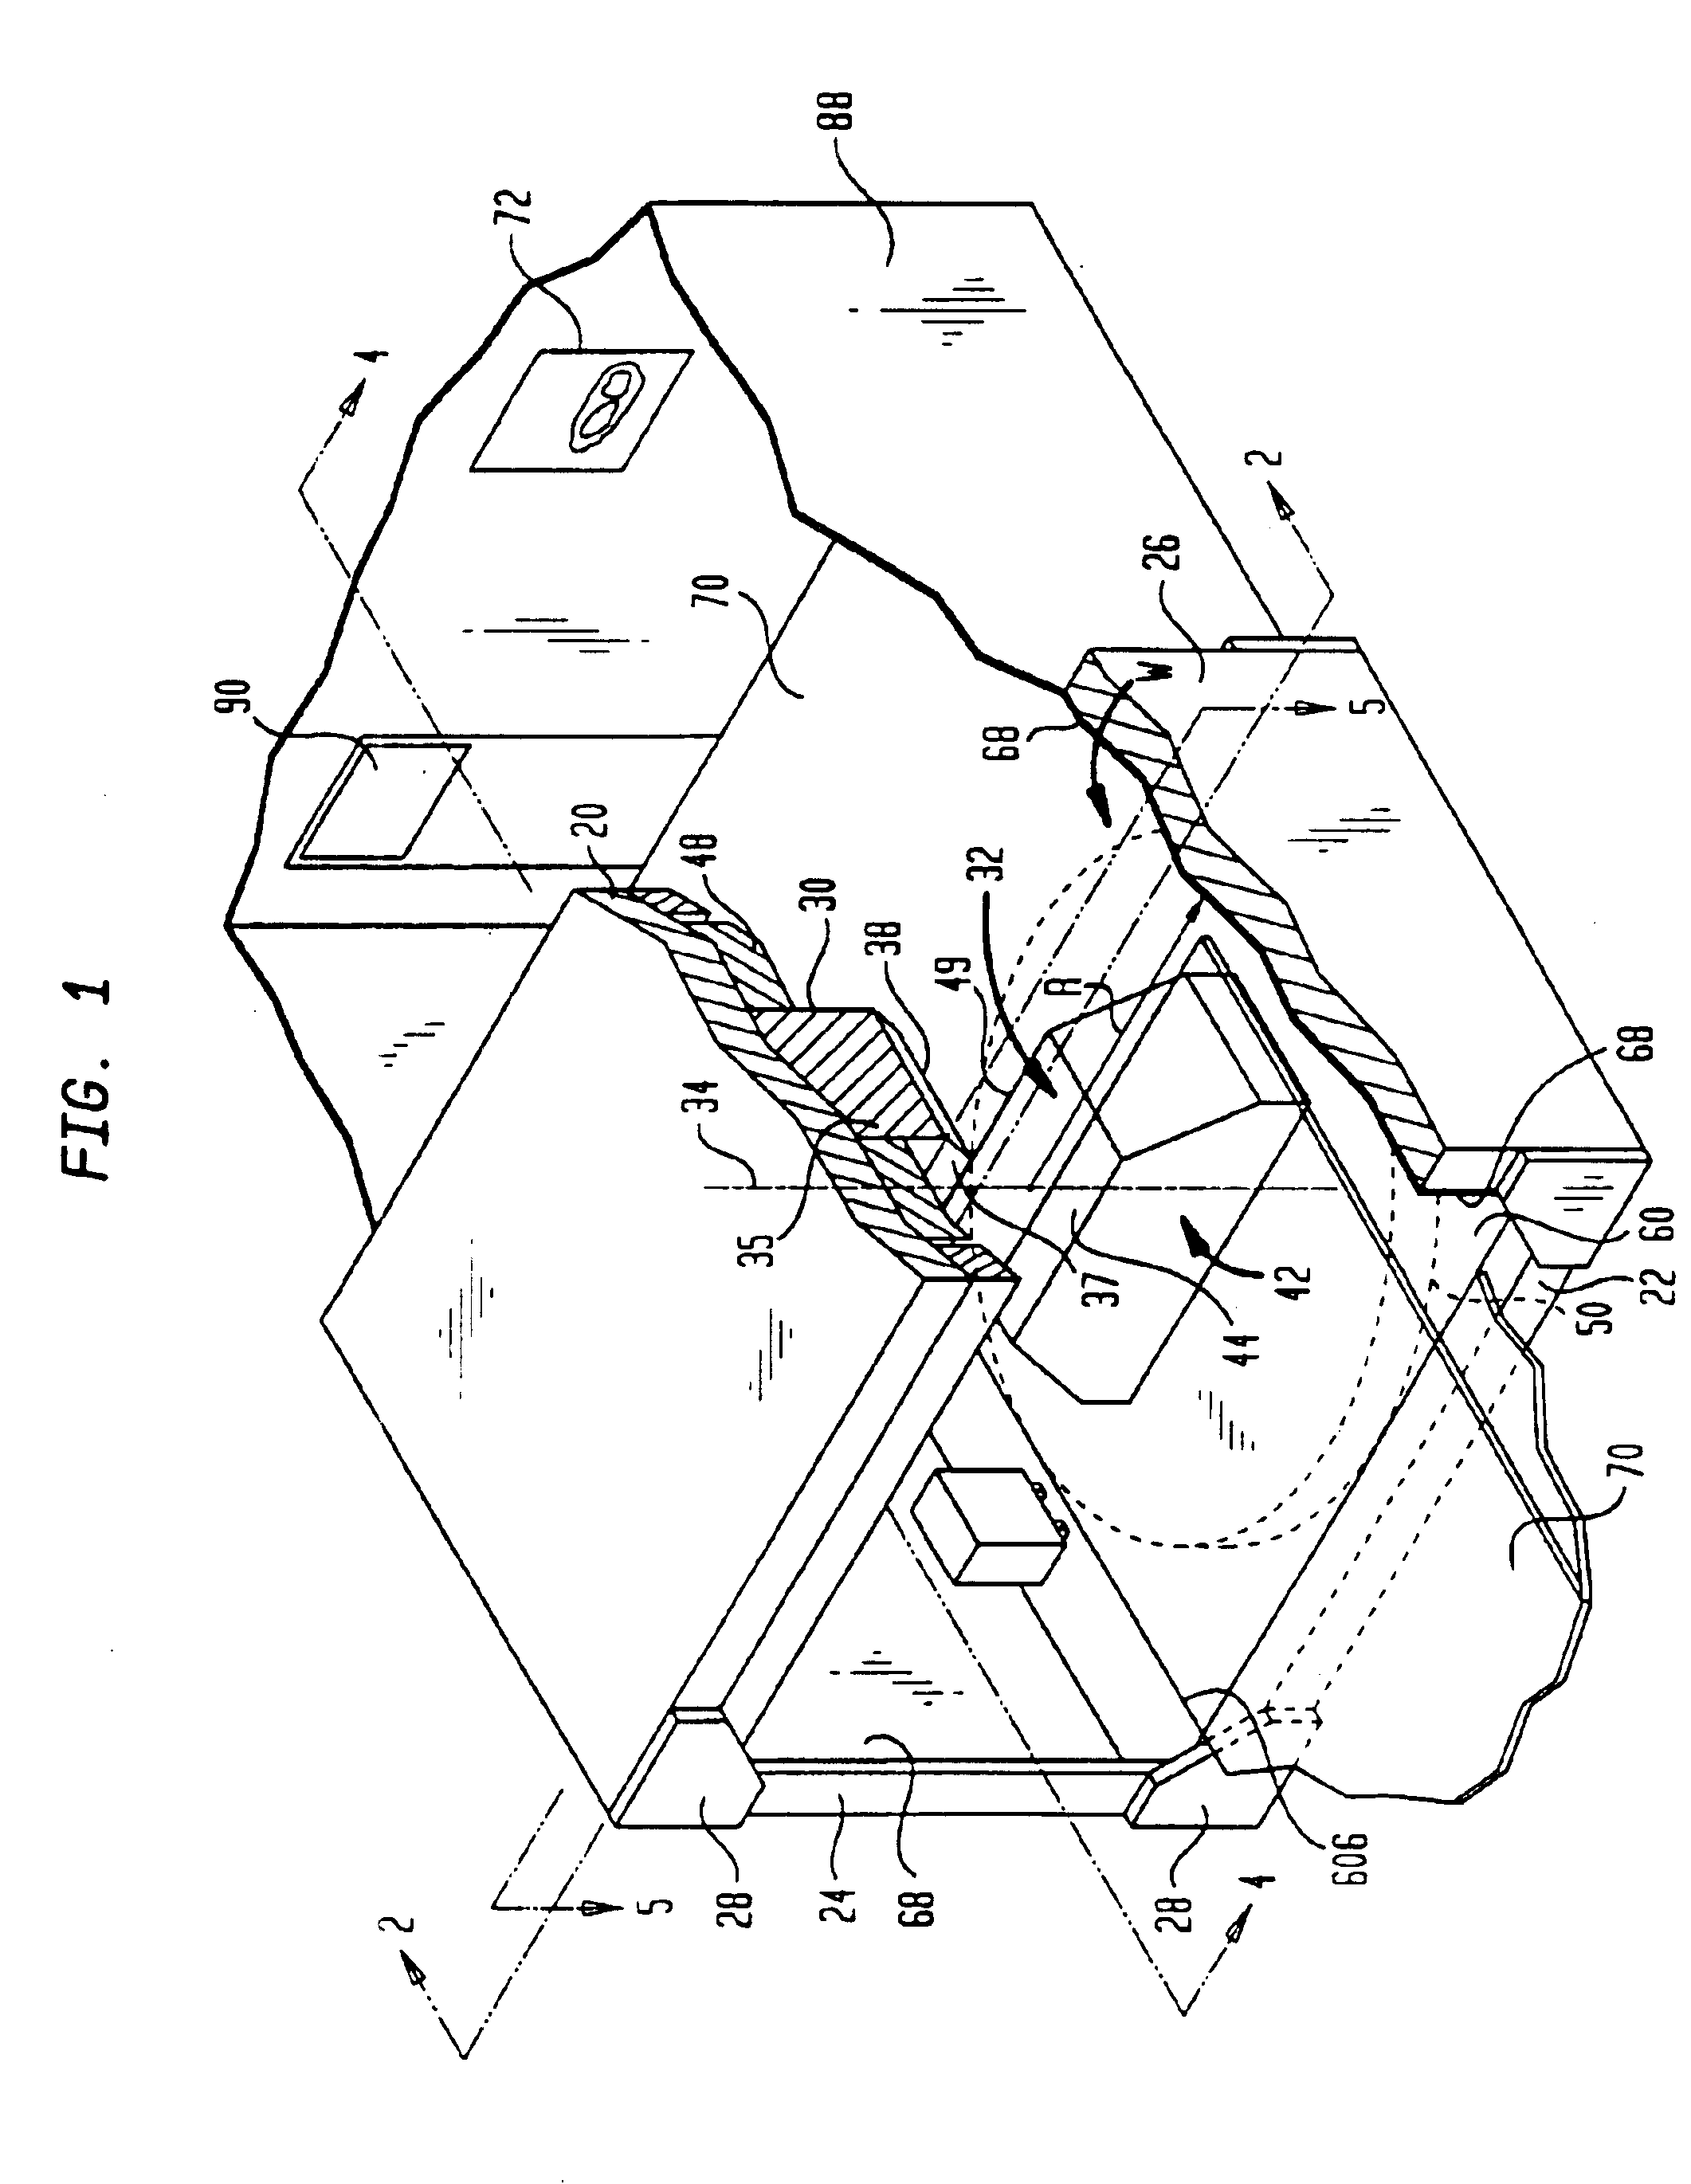 Method for fabricating a ferromagnetic plate